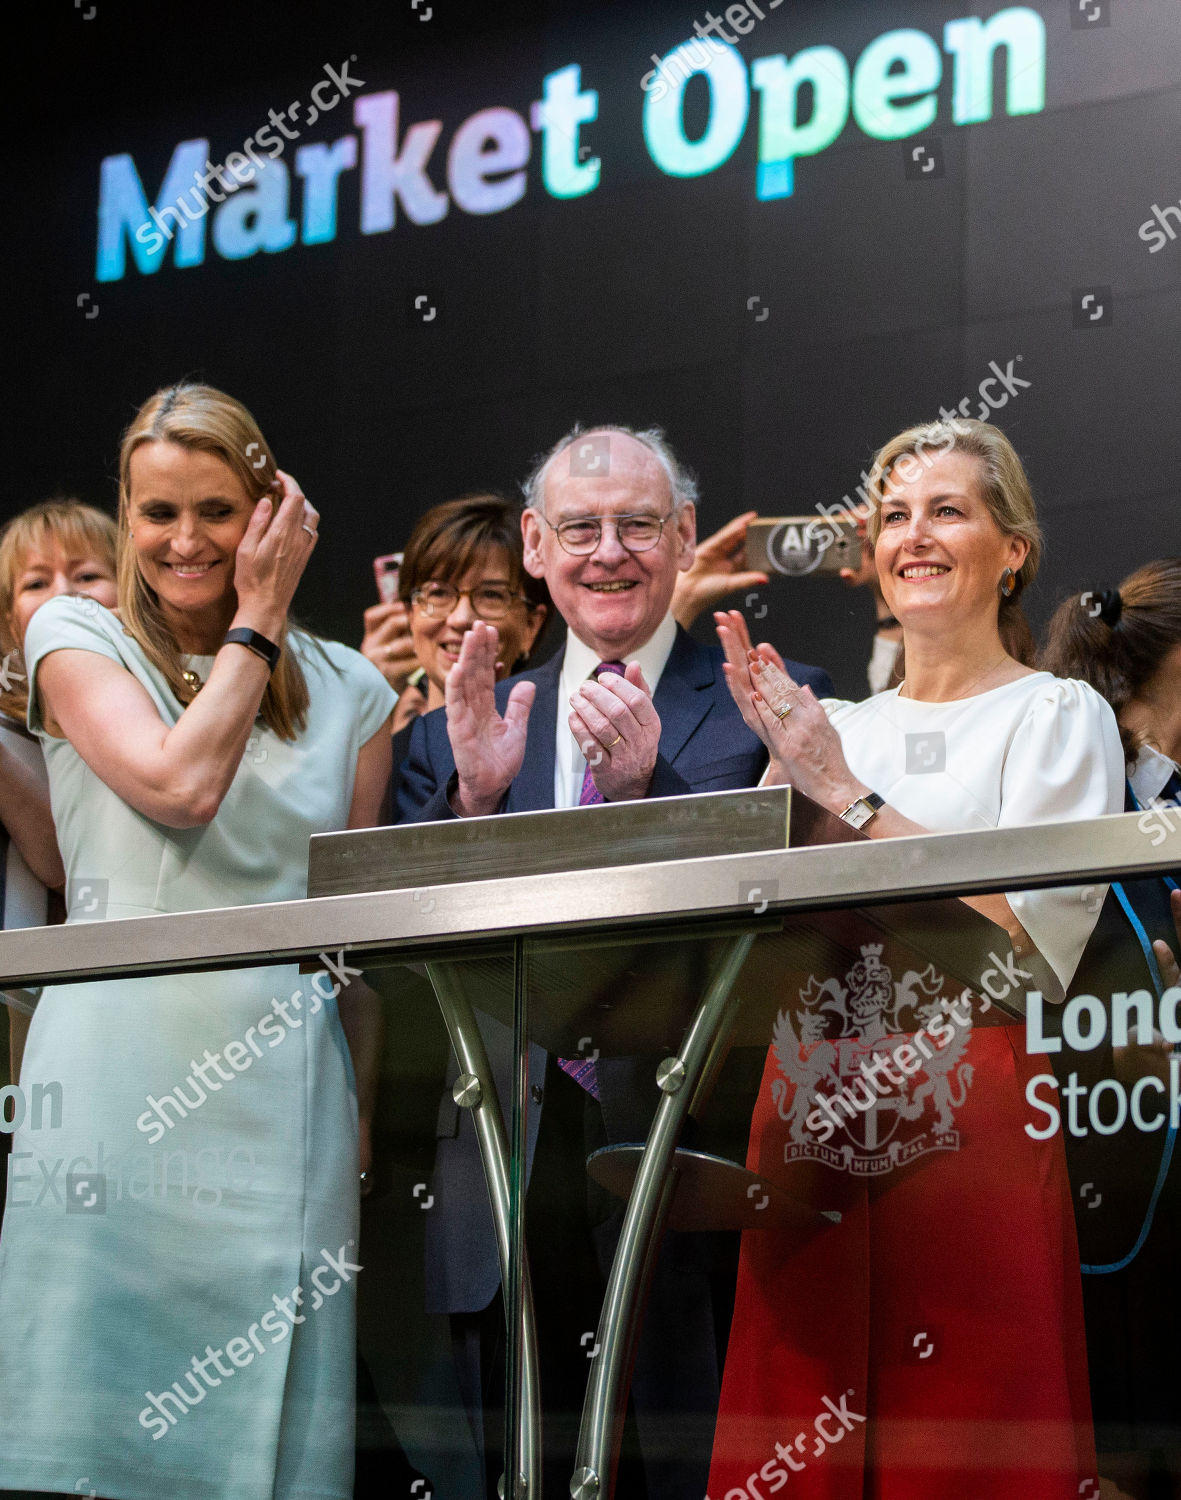 sophie-countess-of-wessex-attends-womens-network-forum-and-market-opening-ceremony-international-womens-day-london-uk-08-mar-2019-shutterstock-editorial-10147941aa.jpg